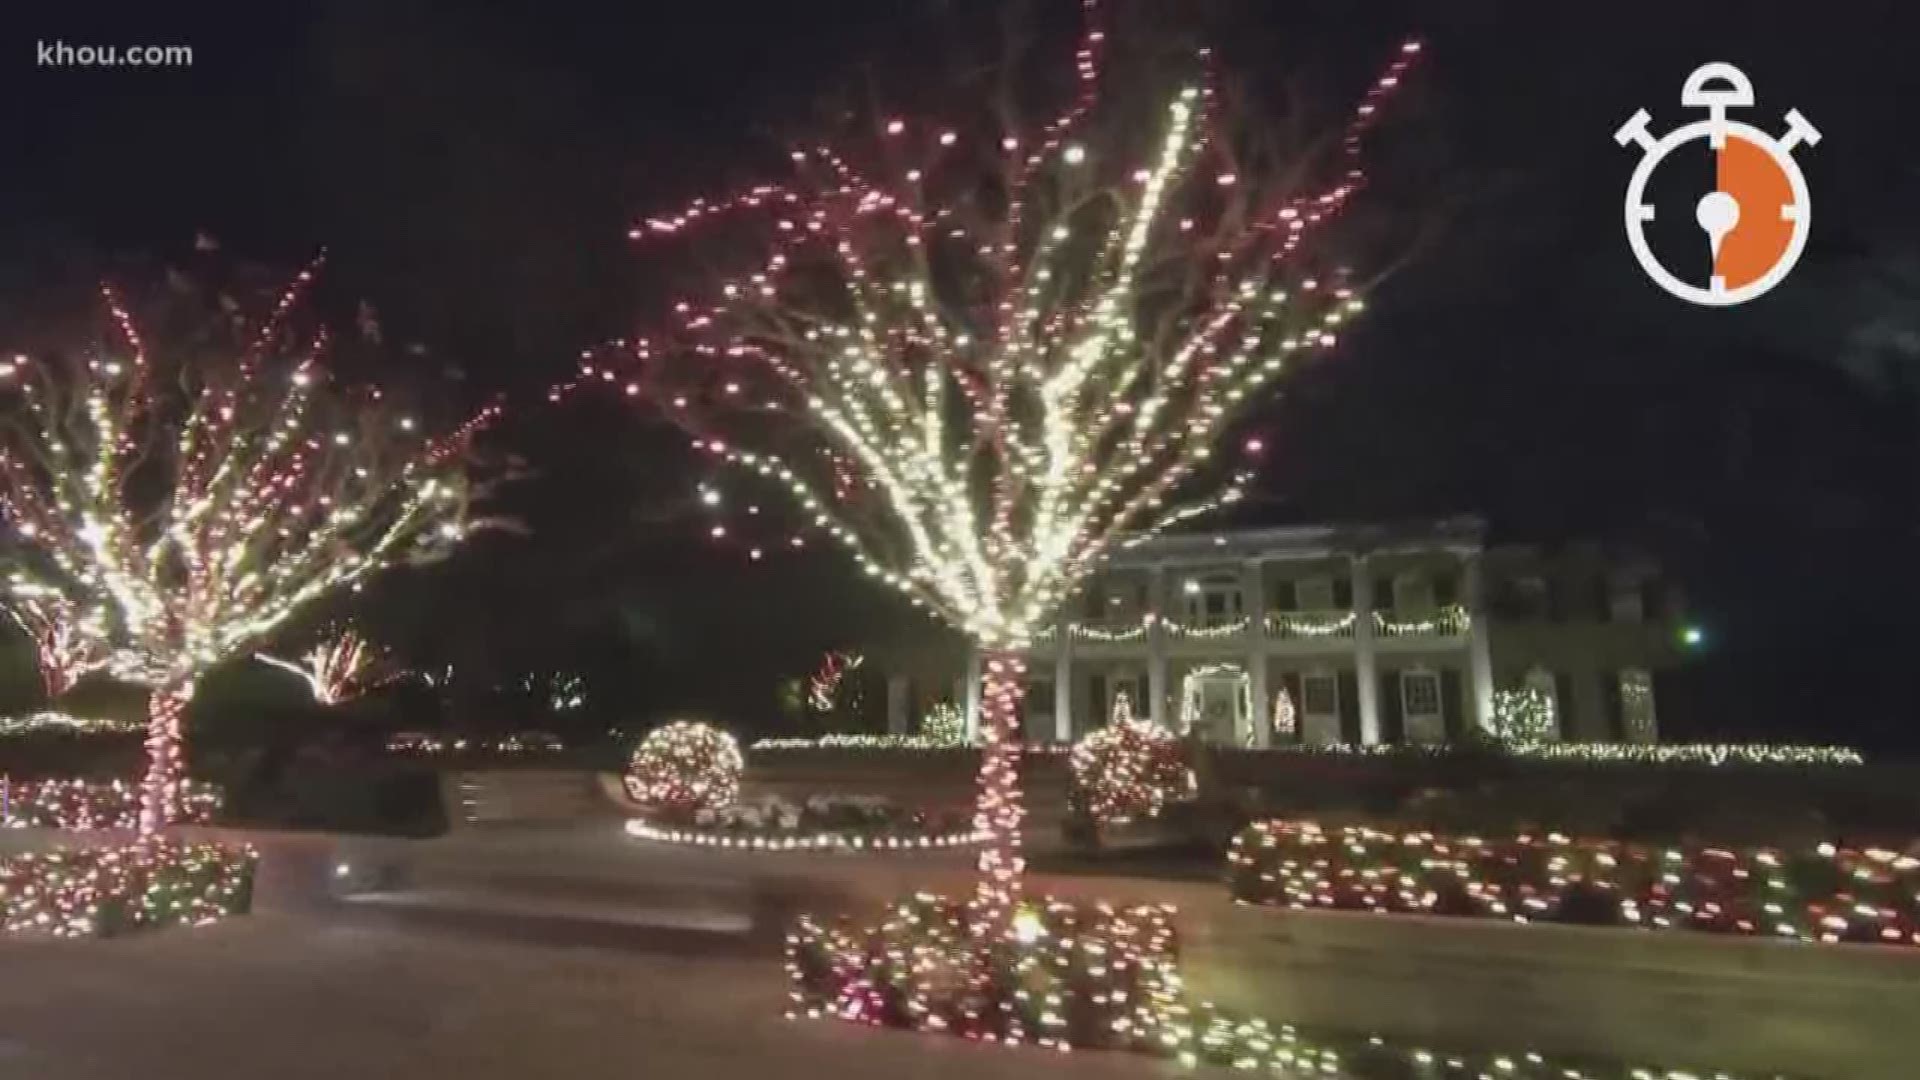 Christmas may be over but the holiday cheer doesn't have to be! There's still time to tour some beautiful Christmas lights. In Wednesday morning's HTown60, our Michelle Choi takes us on a ride through the historic River Oaks neighborhood.